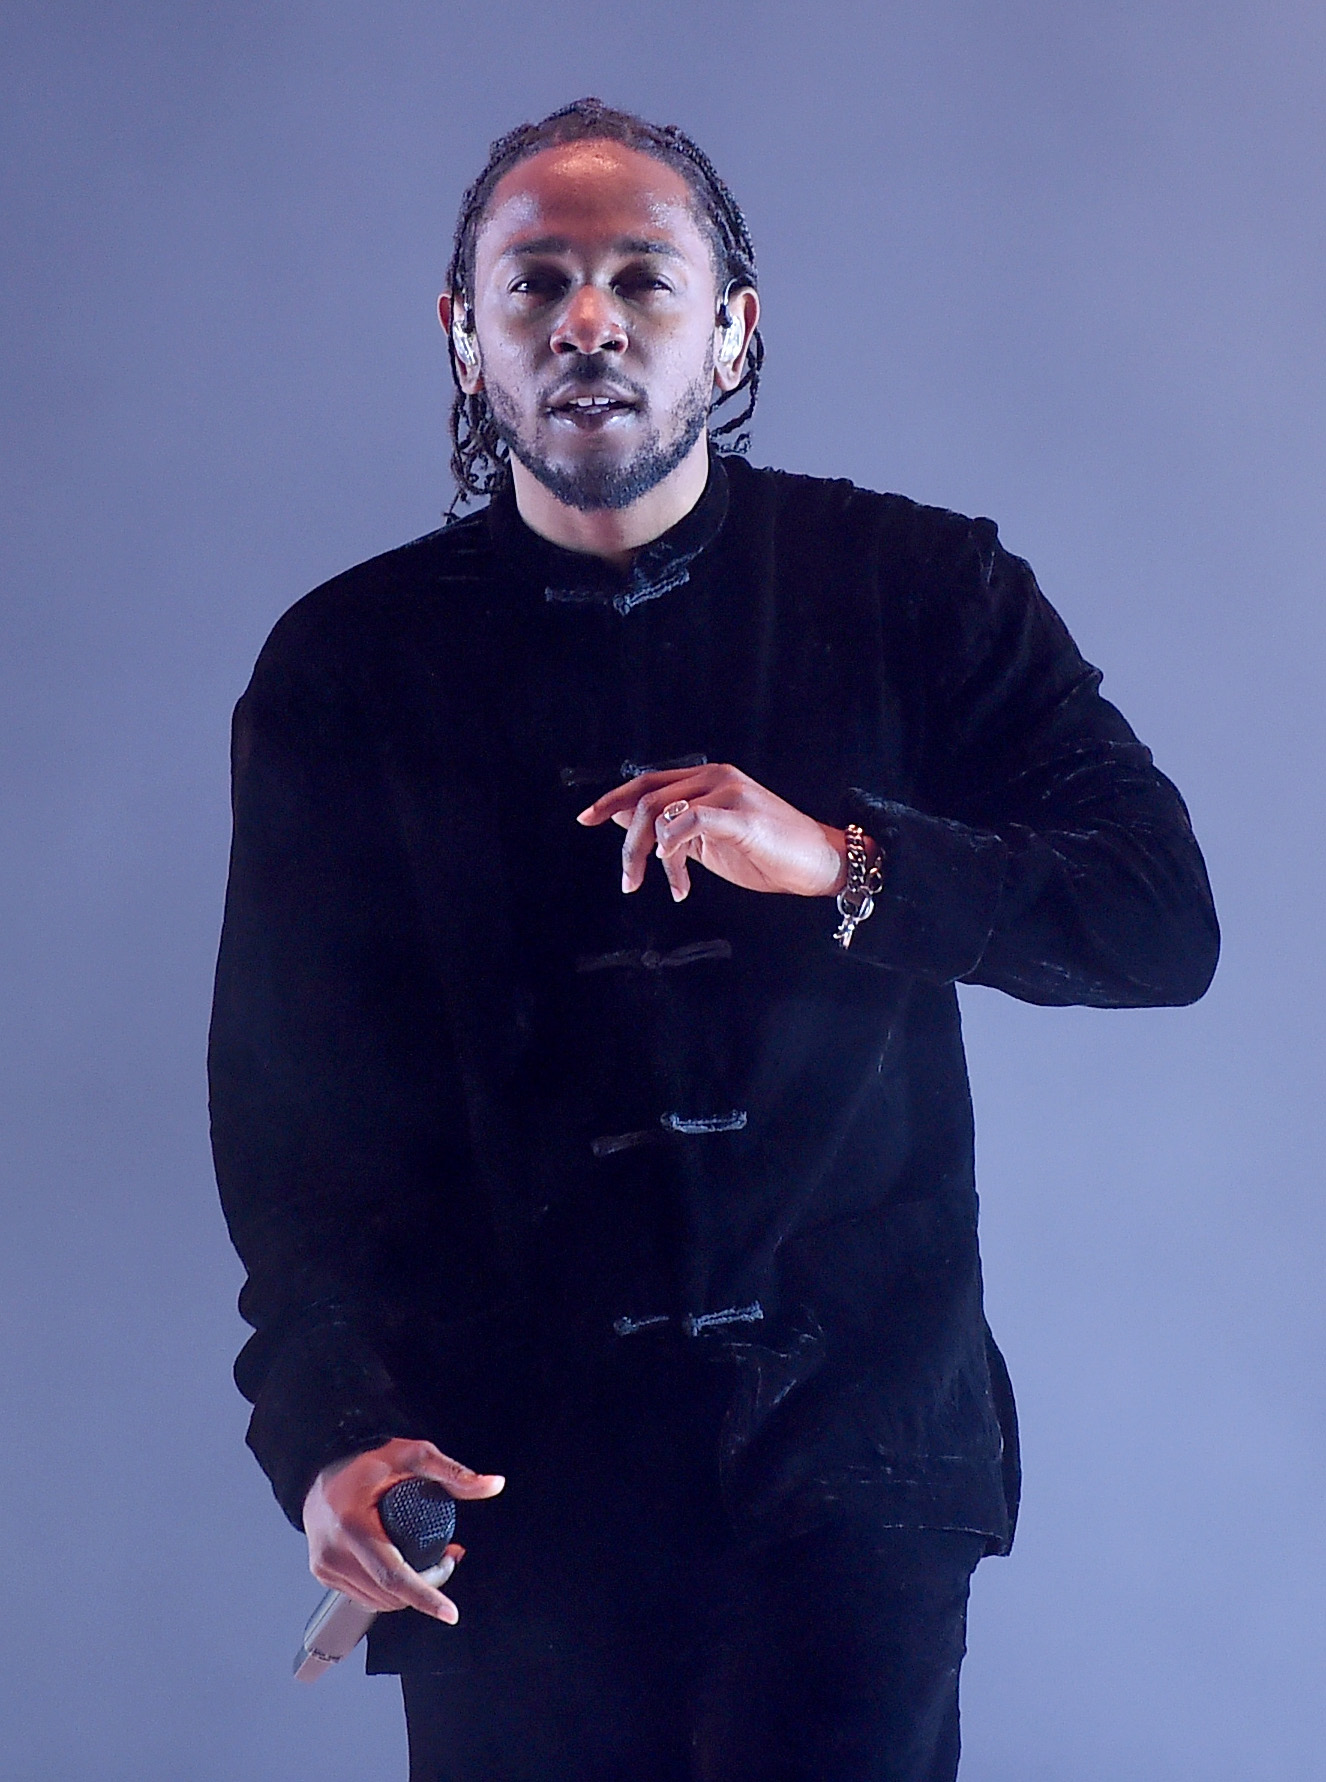 Kendrick Lamar during Coachella Valley Music And Arts Festival on April 23, 2017, in Indio, California. | Source: Getty Images